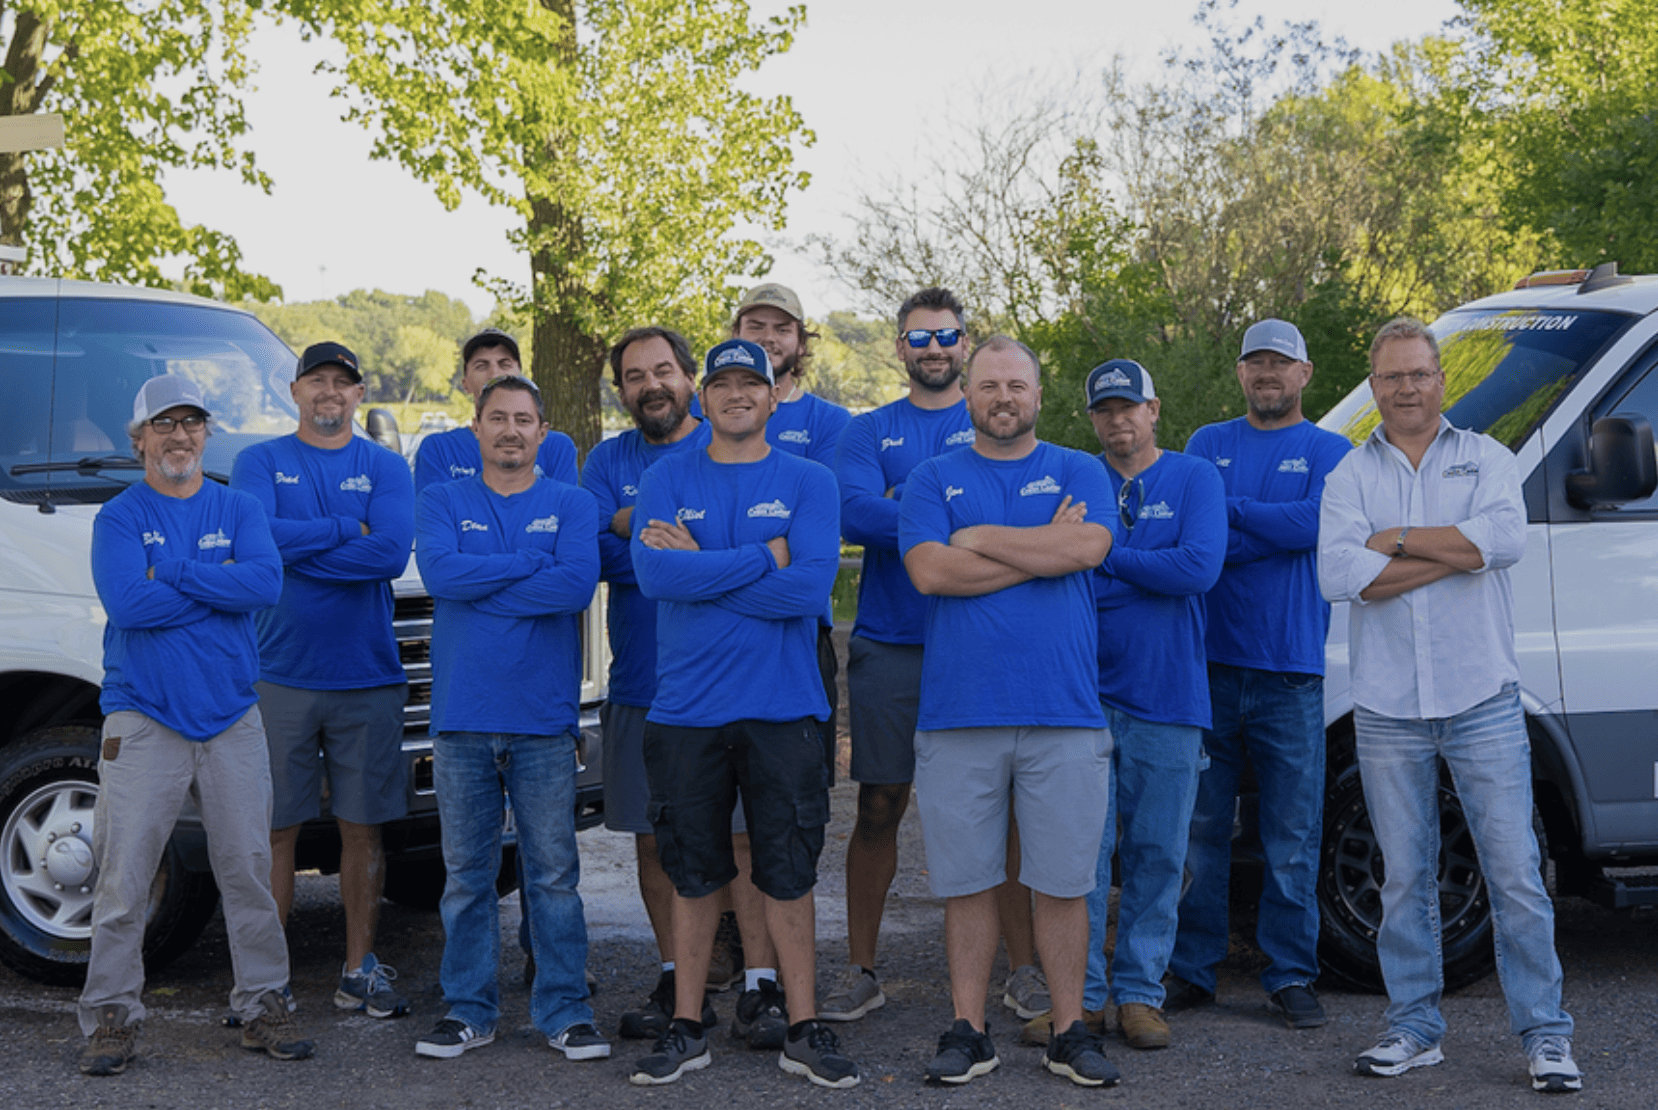 About Carter Custom Construction: the team